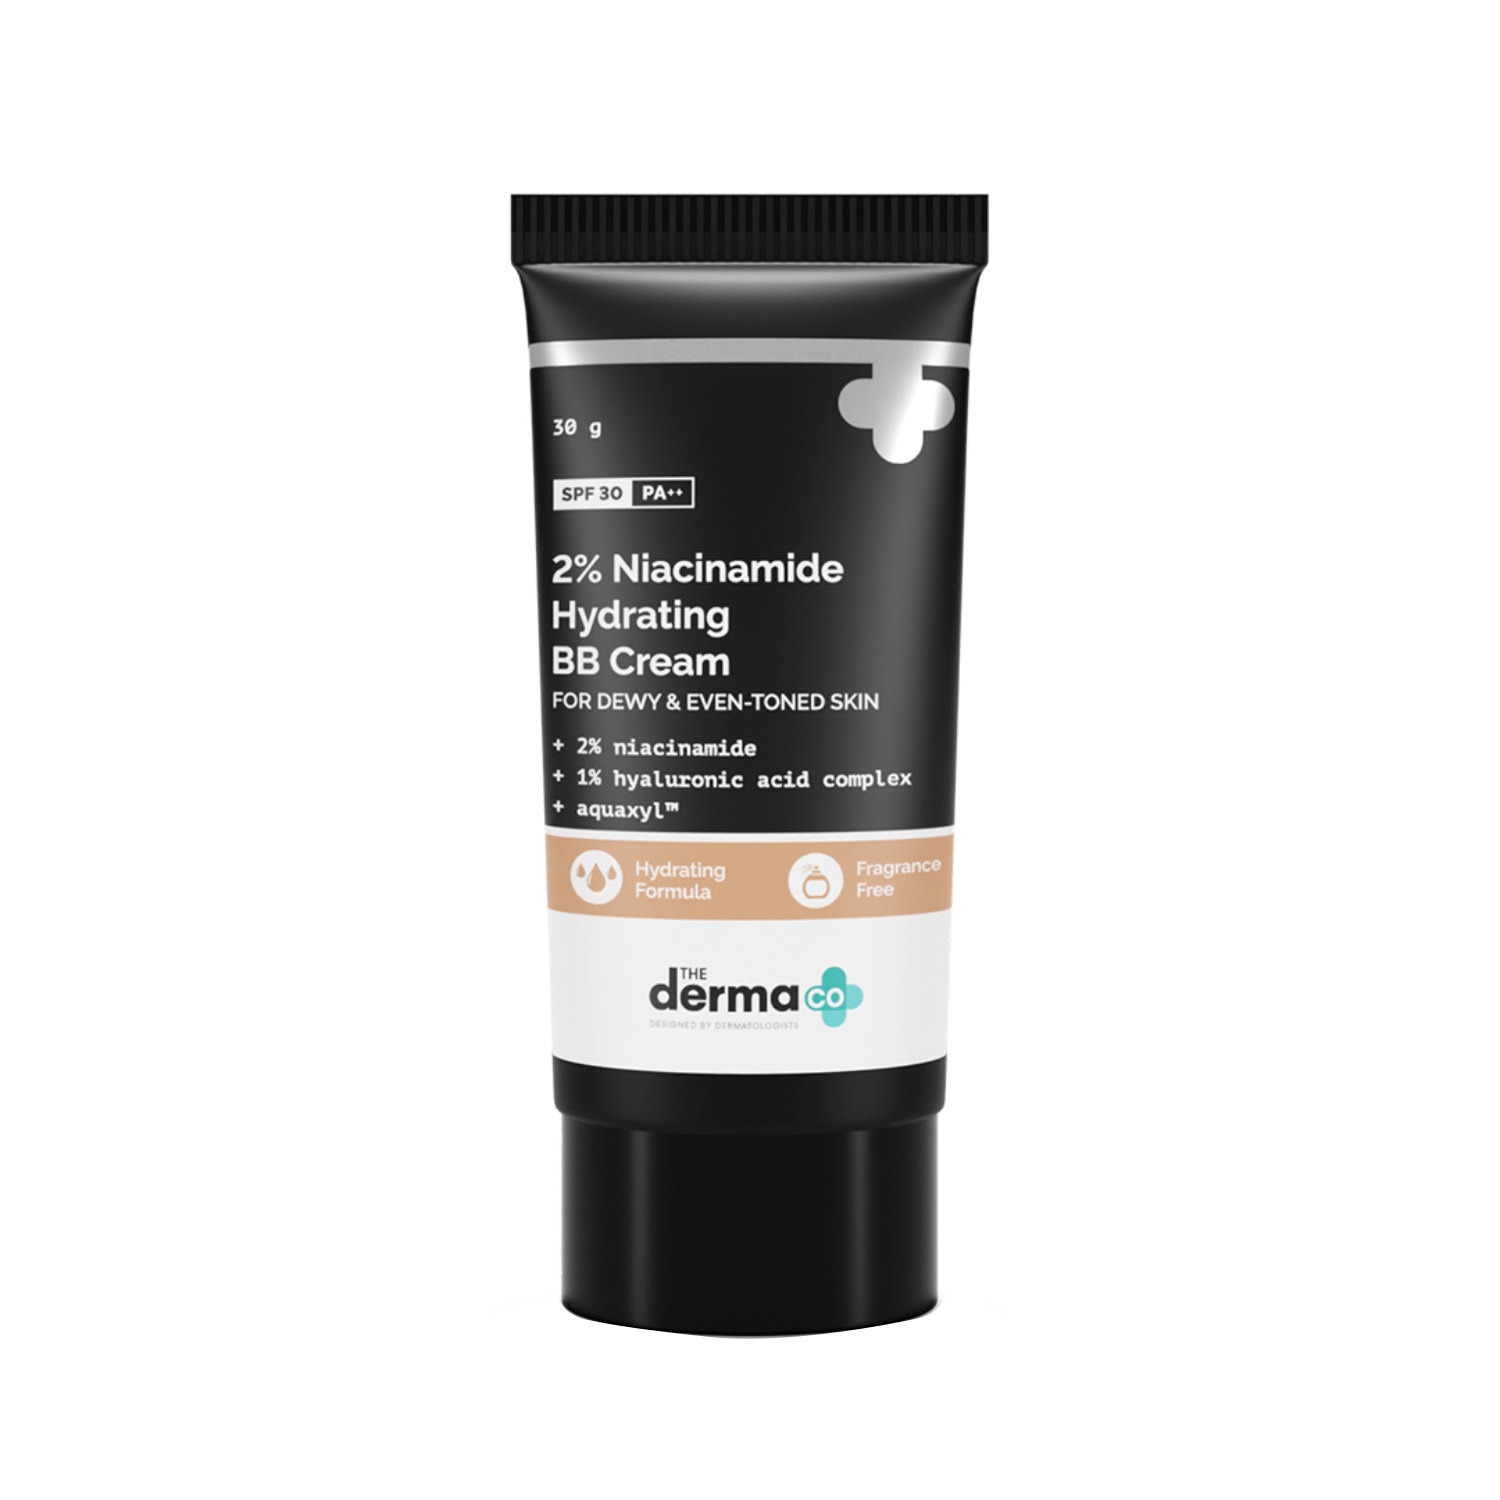 The Derma Co | The Derma Co 2% Niacinamide Hydrating BB Cream With SPF 30 PA++ - Beige (30g)